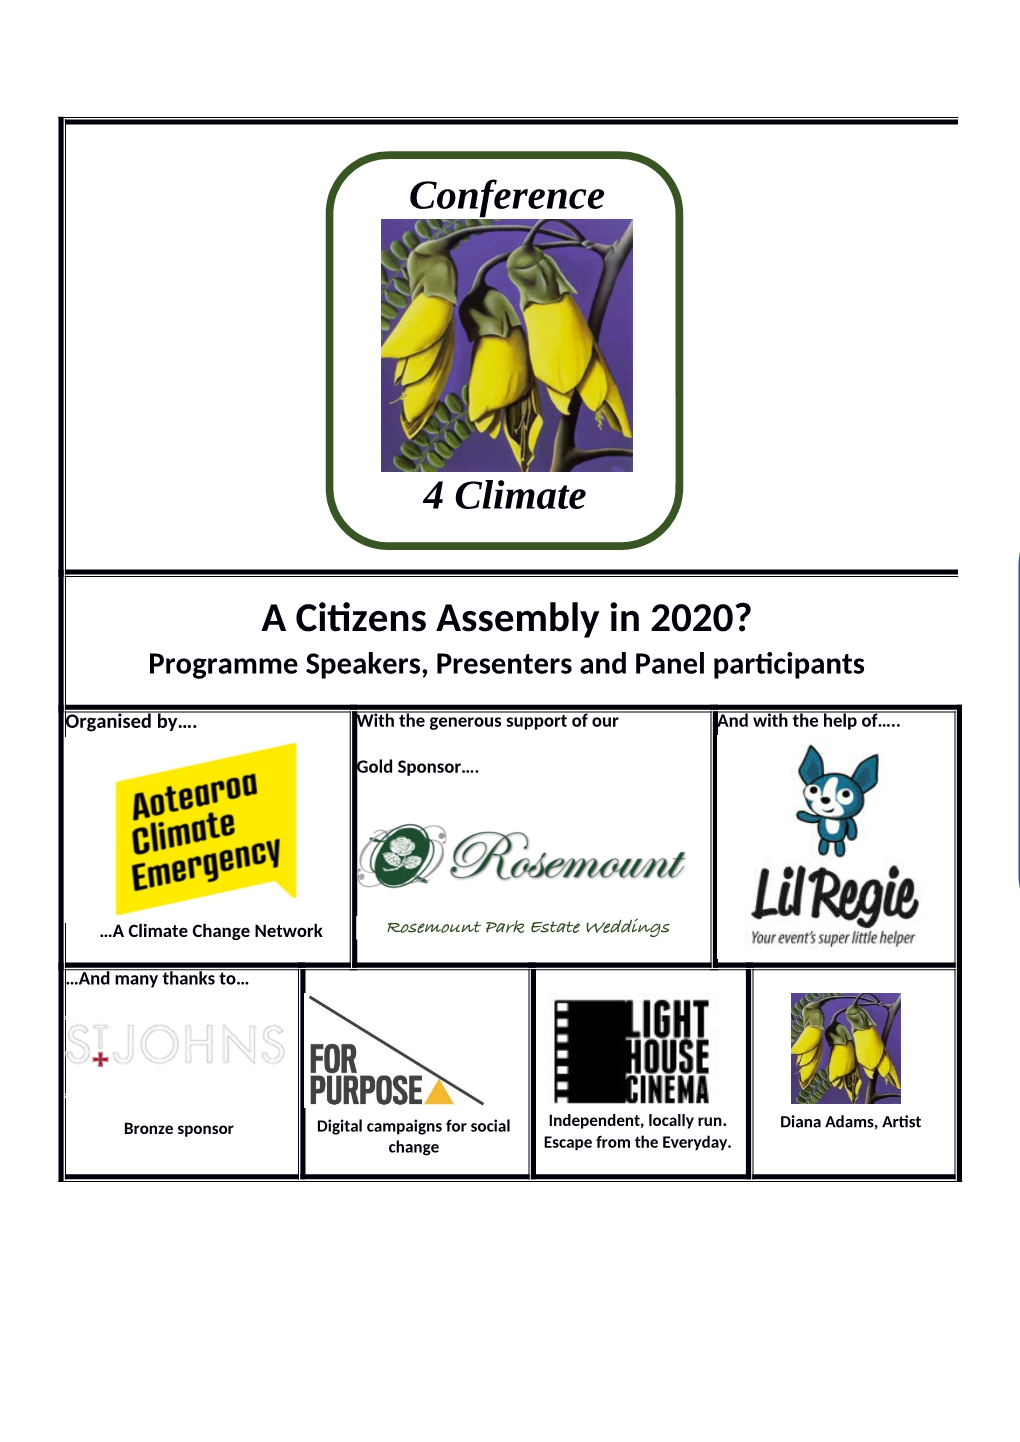 Conference 4 Climate a Citizens Ansnszmbly Ie 2020?